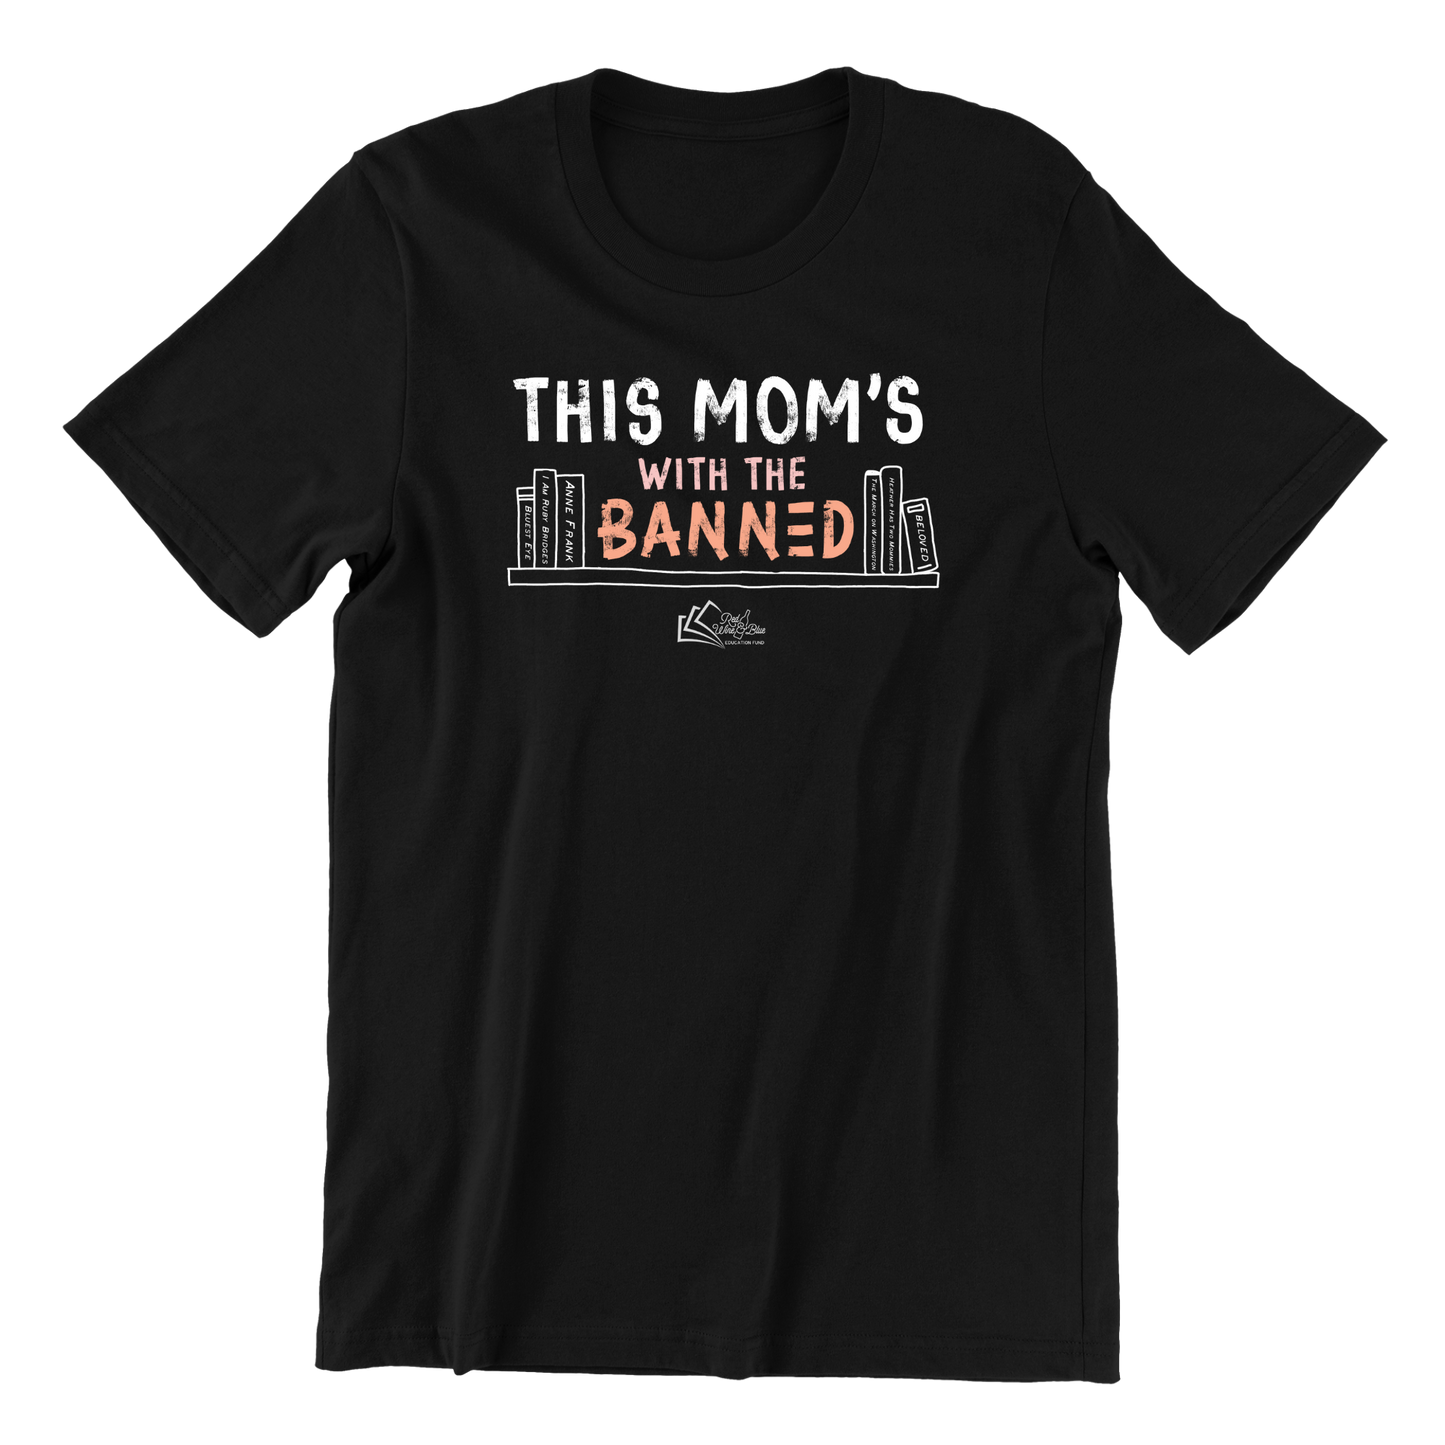 With the Banned T-shirt